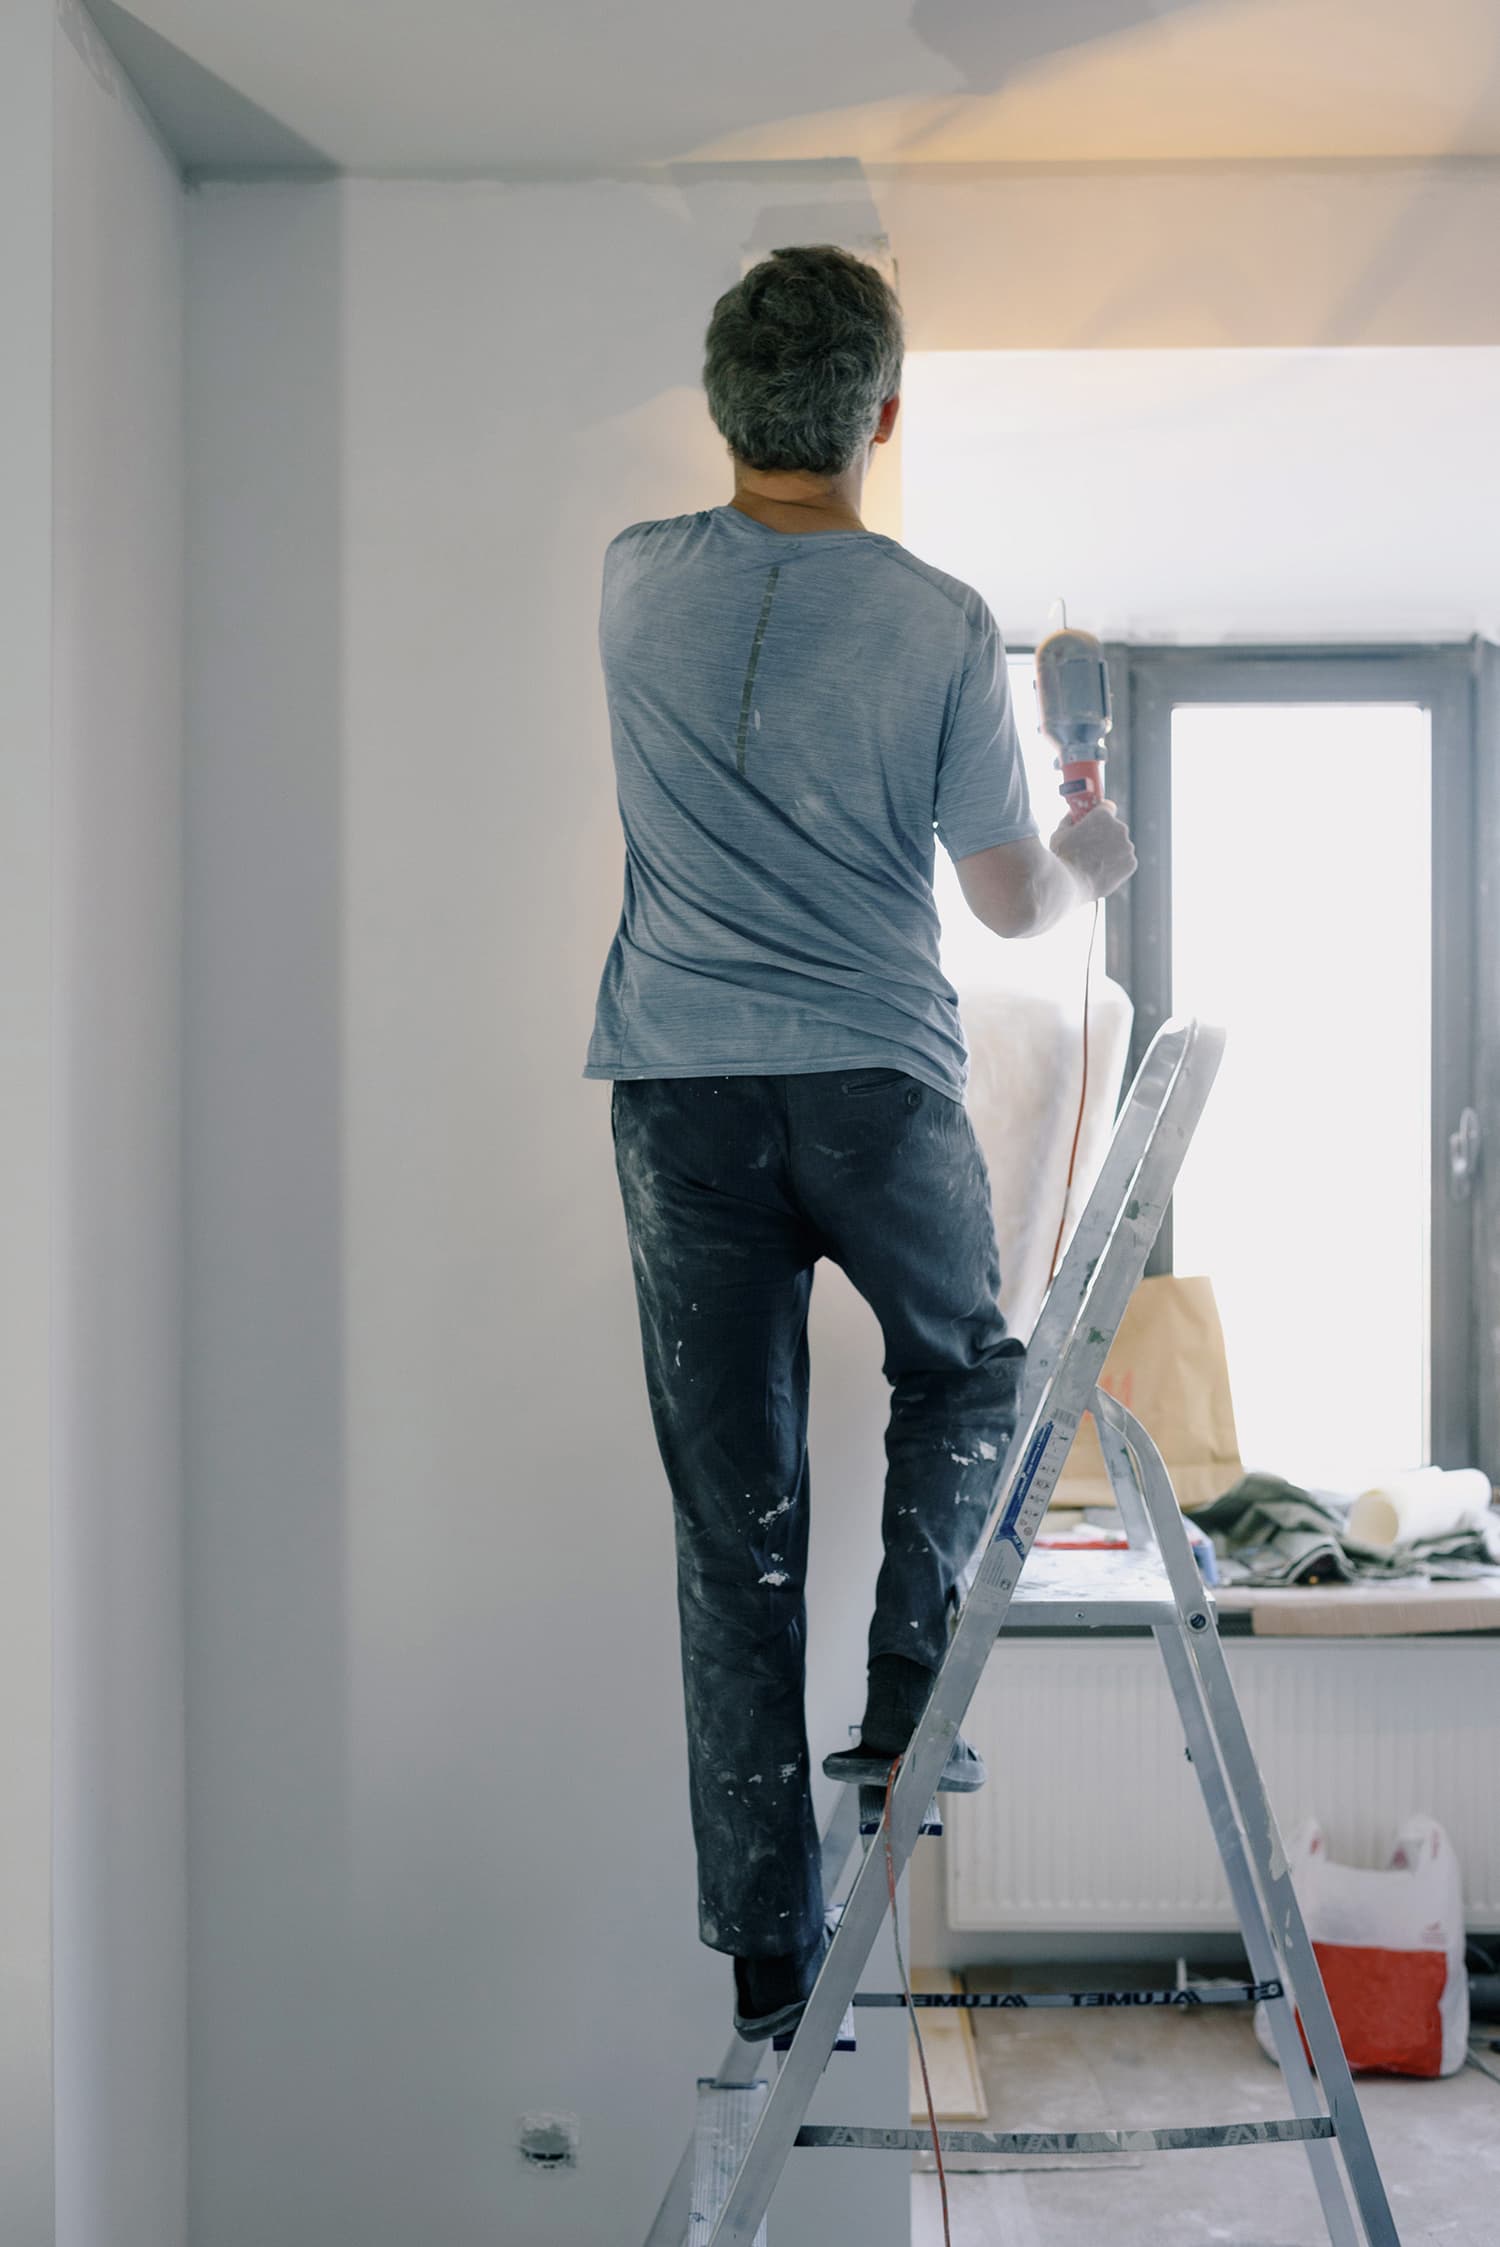 Man on a ladder paints a wall